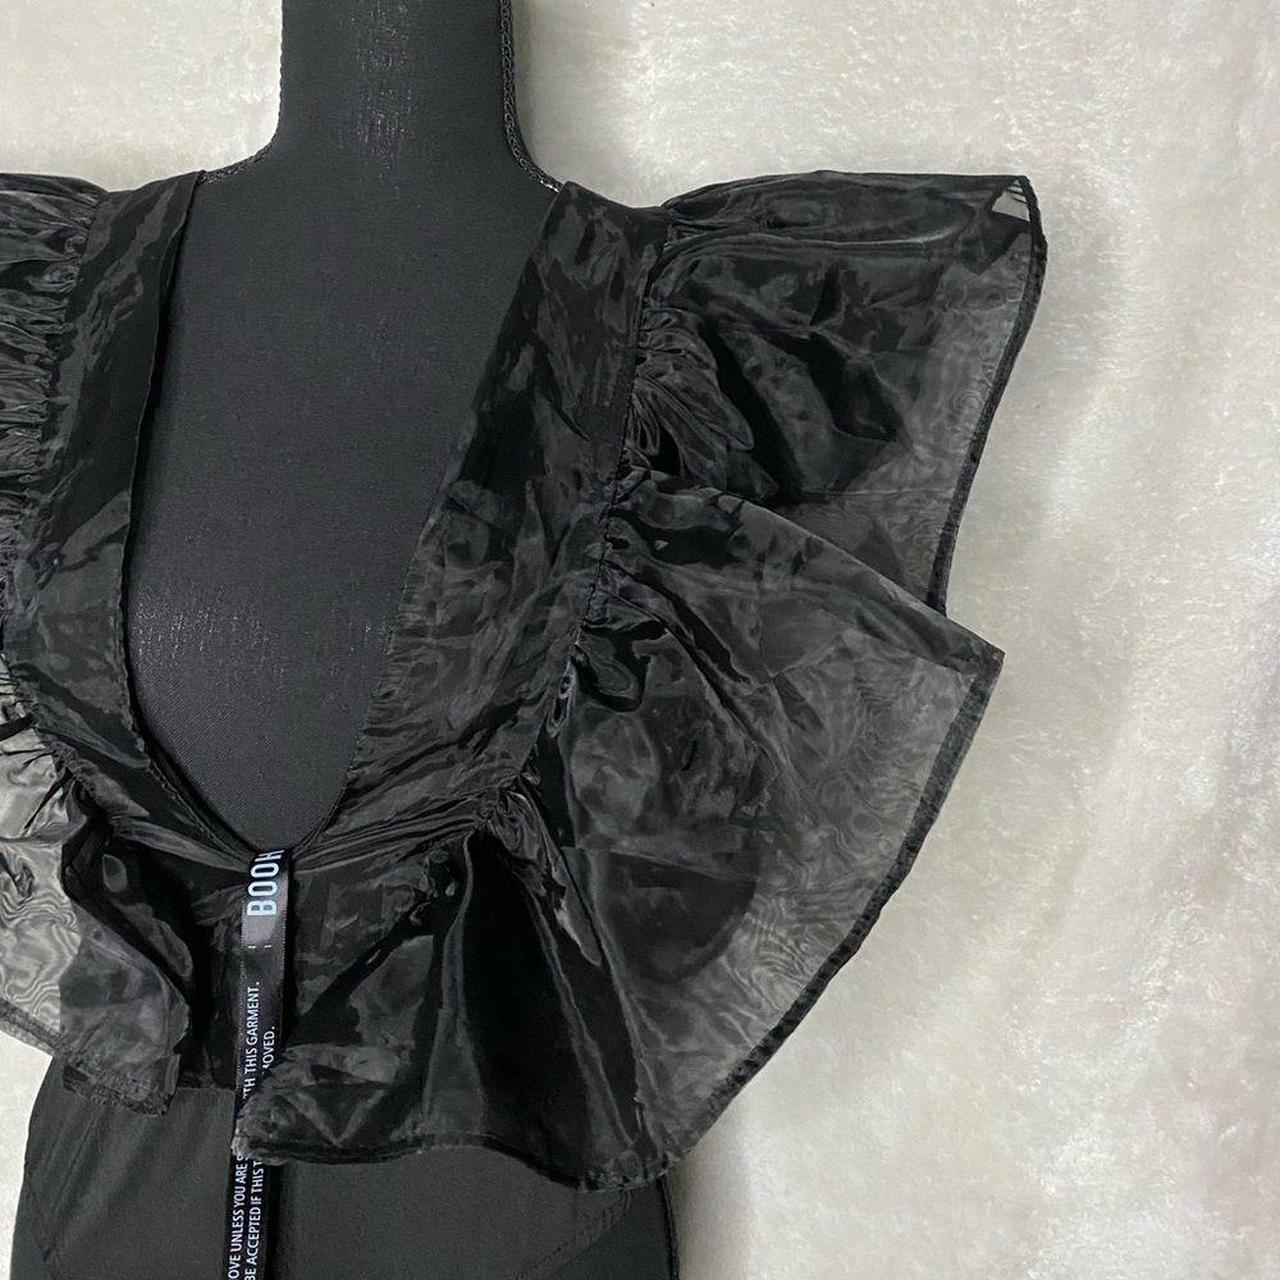 Product Image 2 - Black
Size 8 
Ruffled 
Zippered in